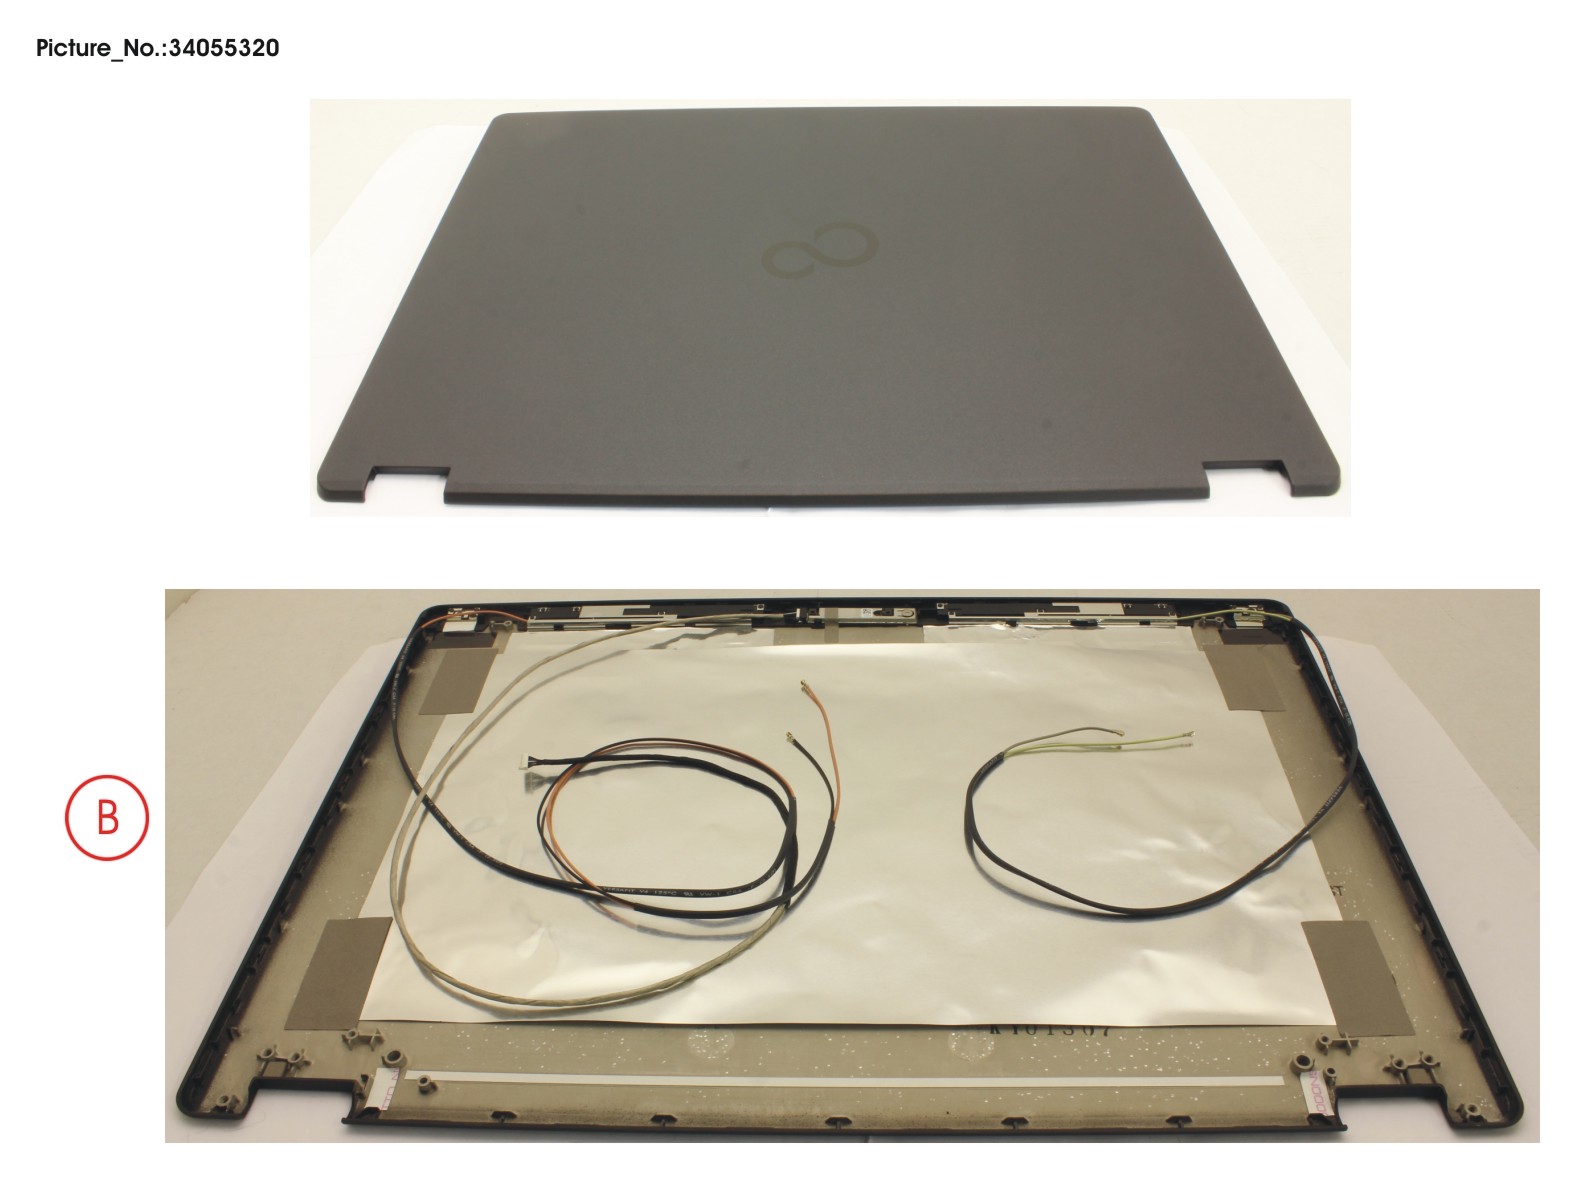 LCD BACK COVER ASSY (W/ MIC FOR WWAN)